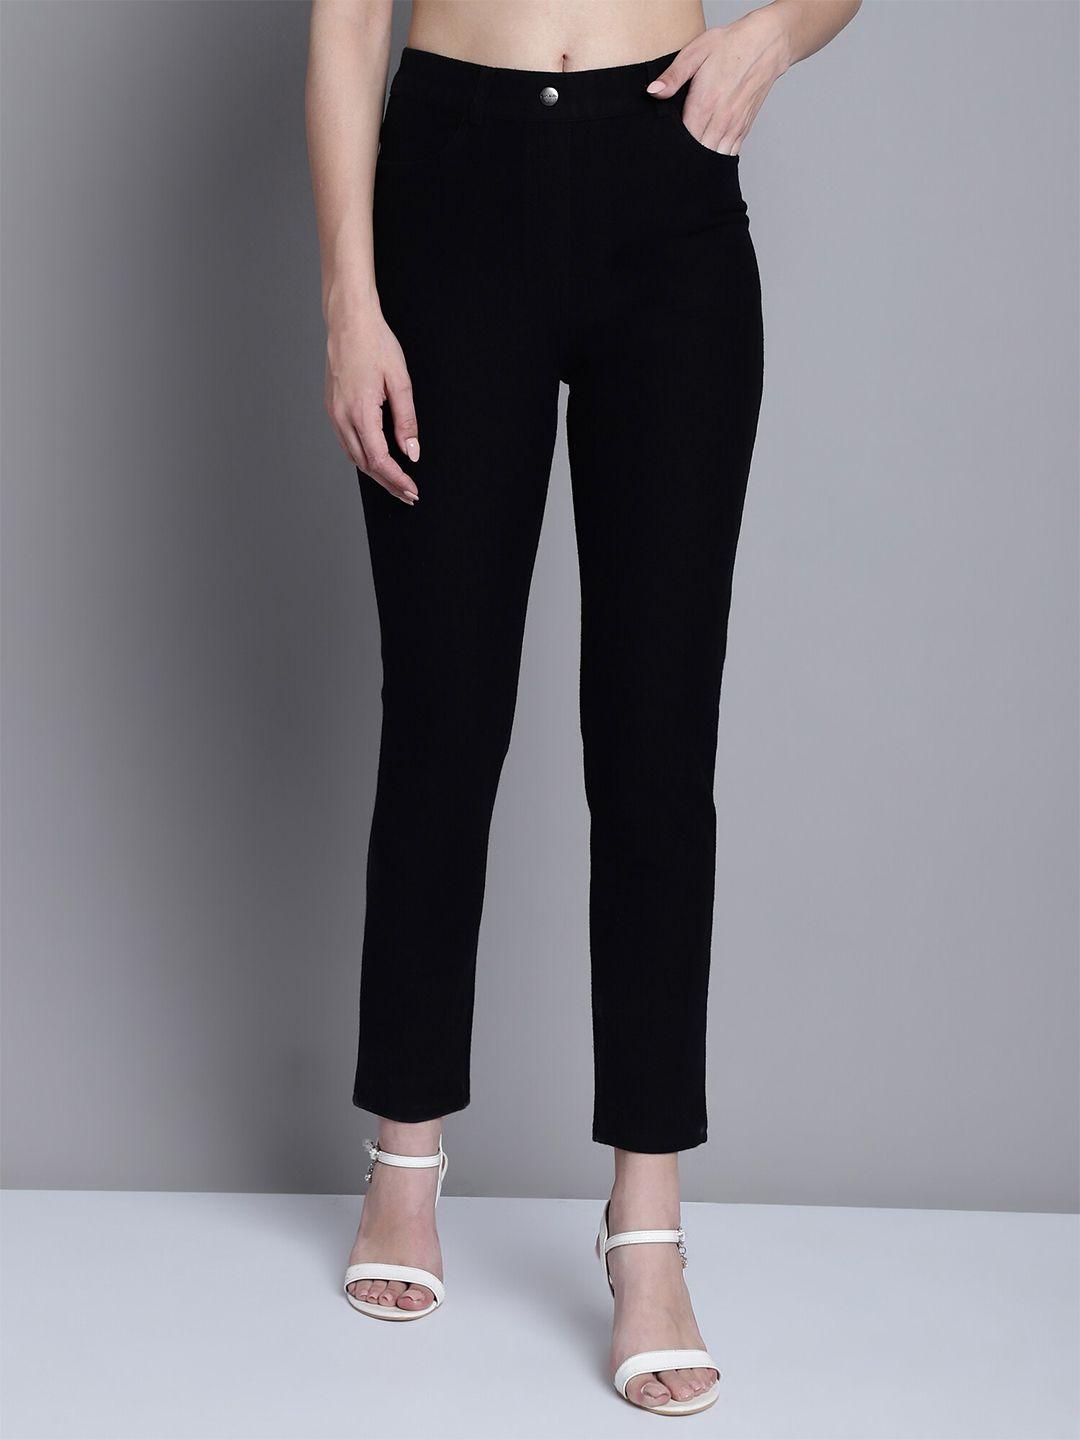 cantabil-women-mid-rise-jeggings